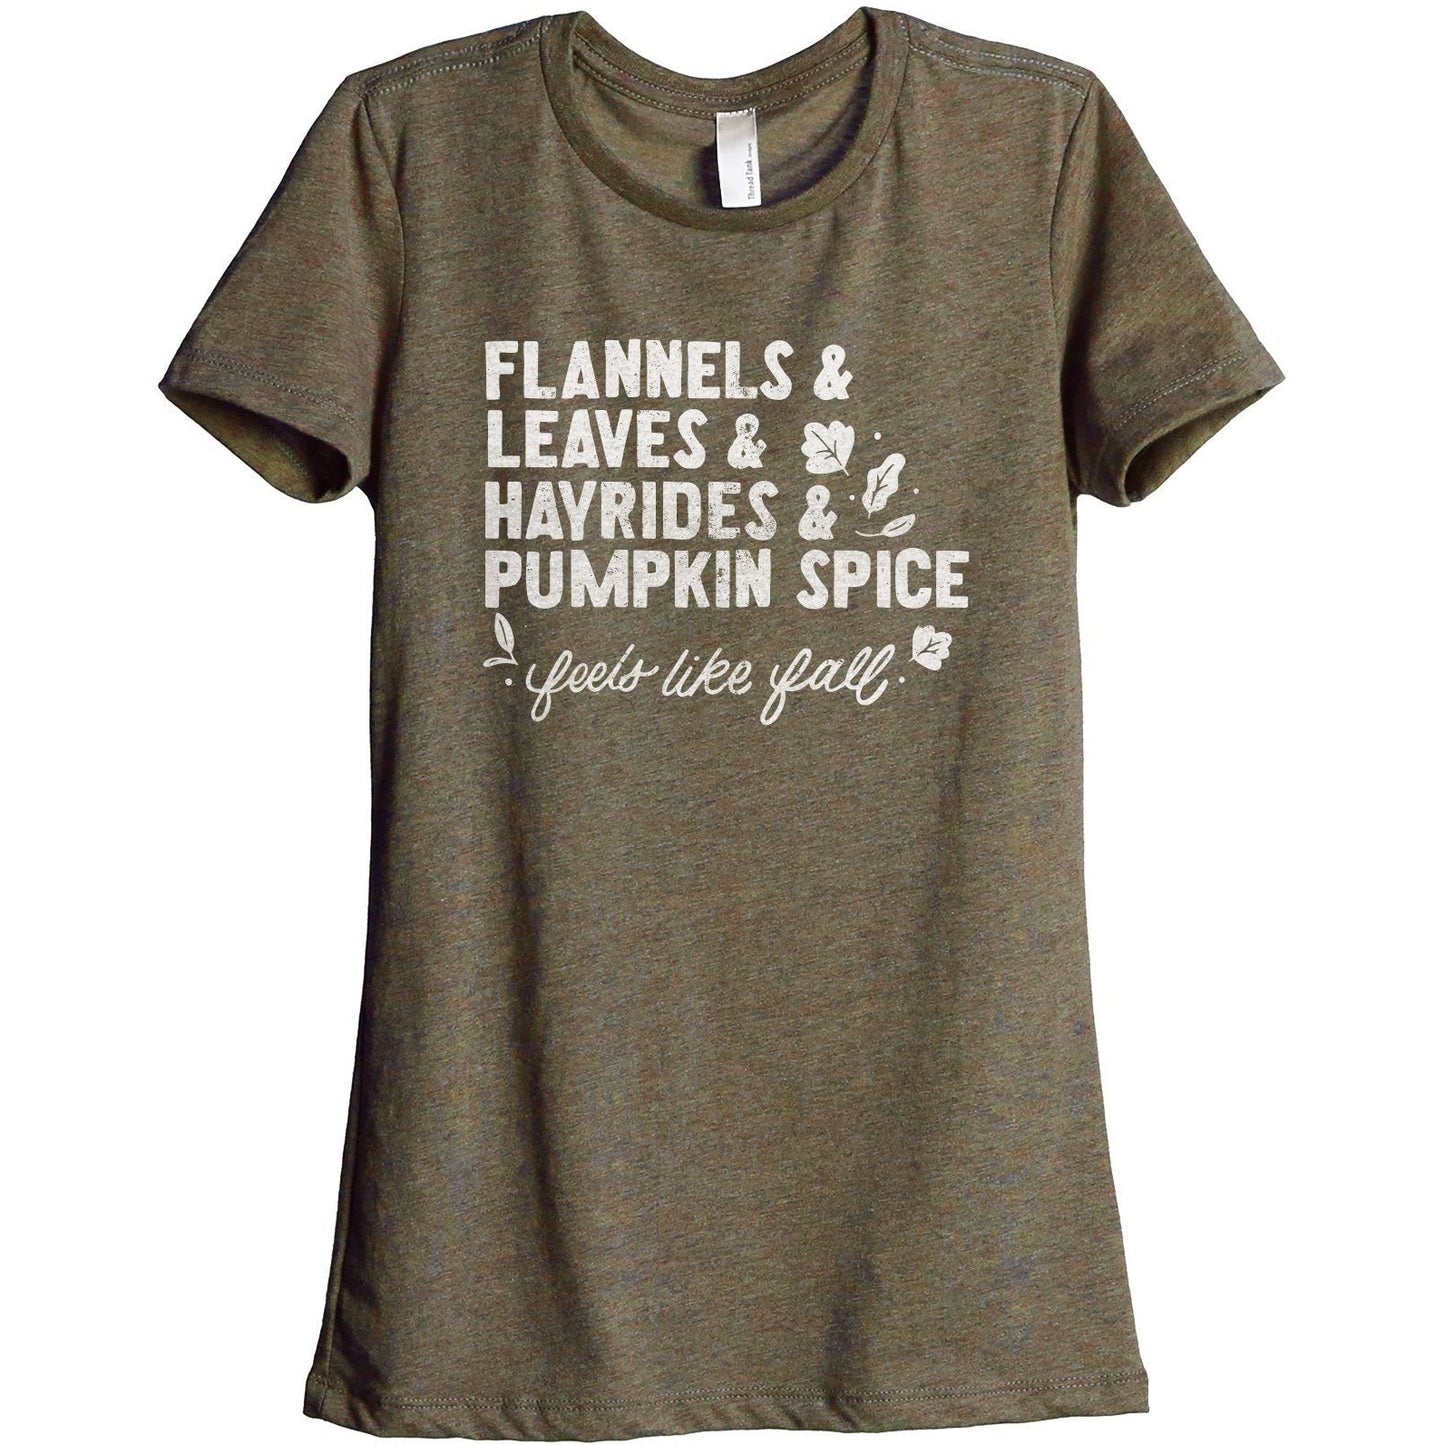 Flannels & Leaves & Hayrides & Pumpkin Spice...Feels like Fall Women's Relaxed Crewneck T-Shirt Top Tee Heather Sage